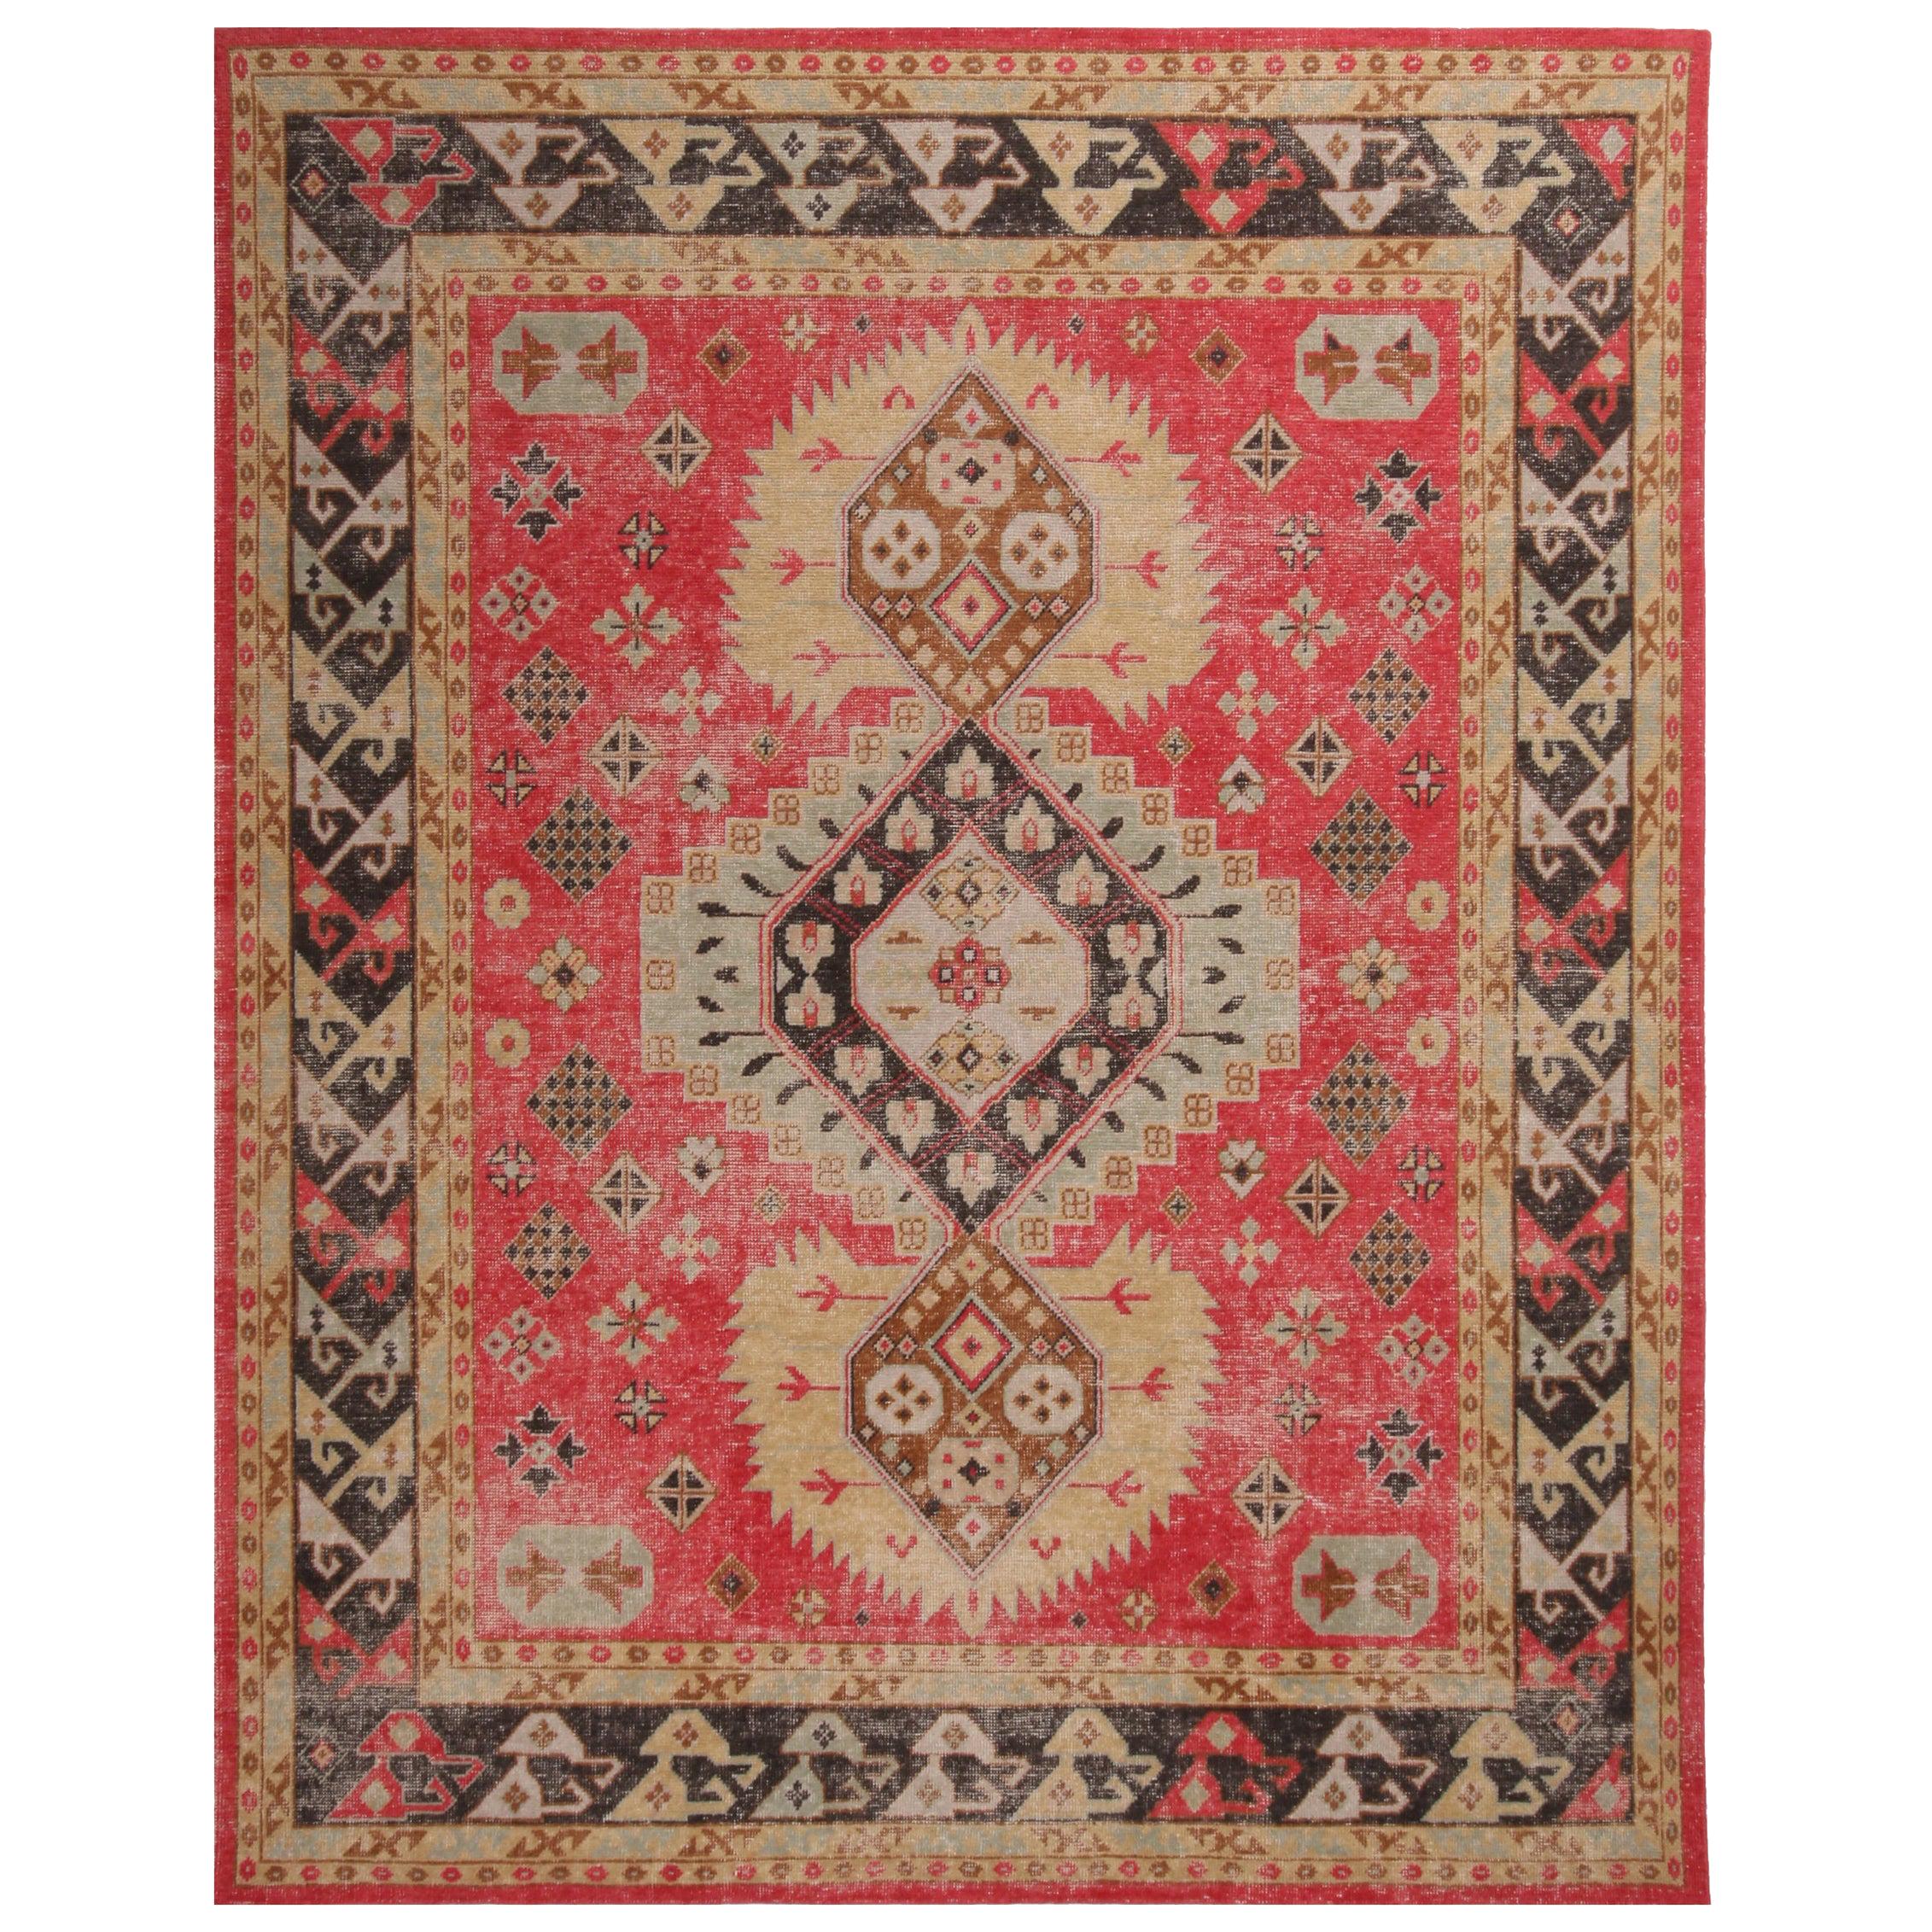 Rug & Kilim's Red and Bright Gold Wool Rug from the Homage Collection